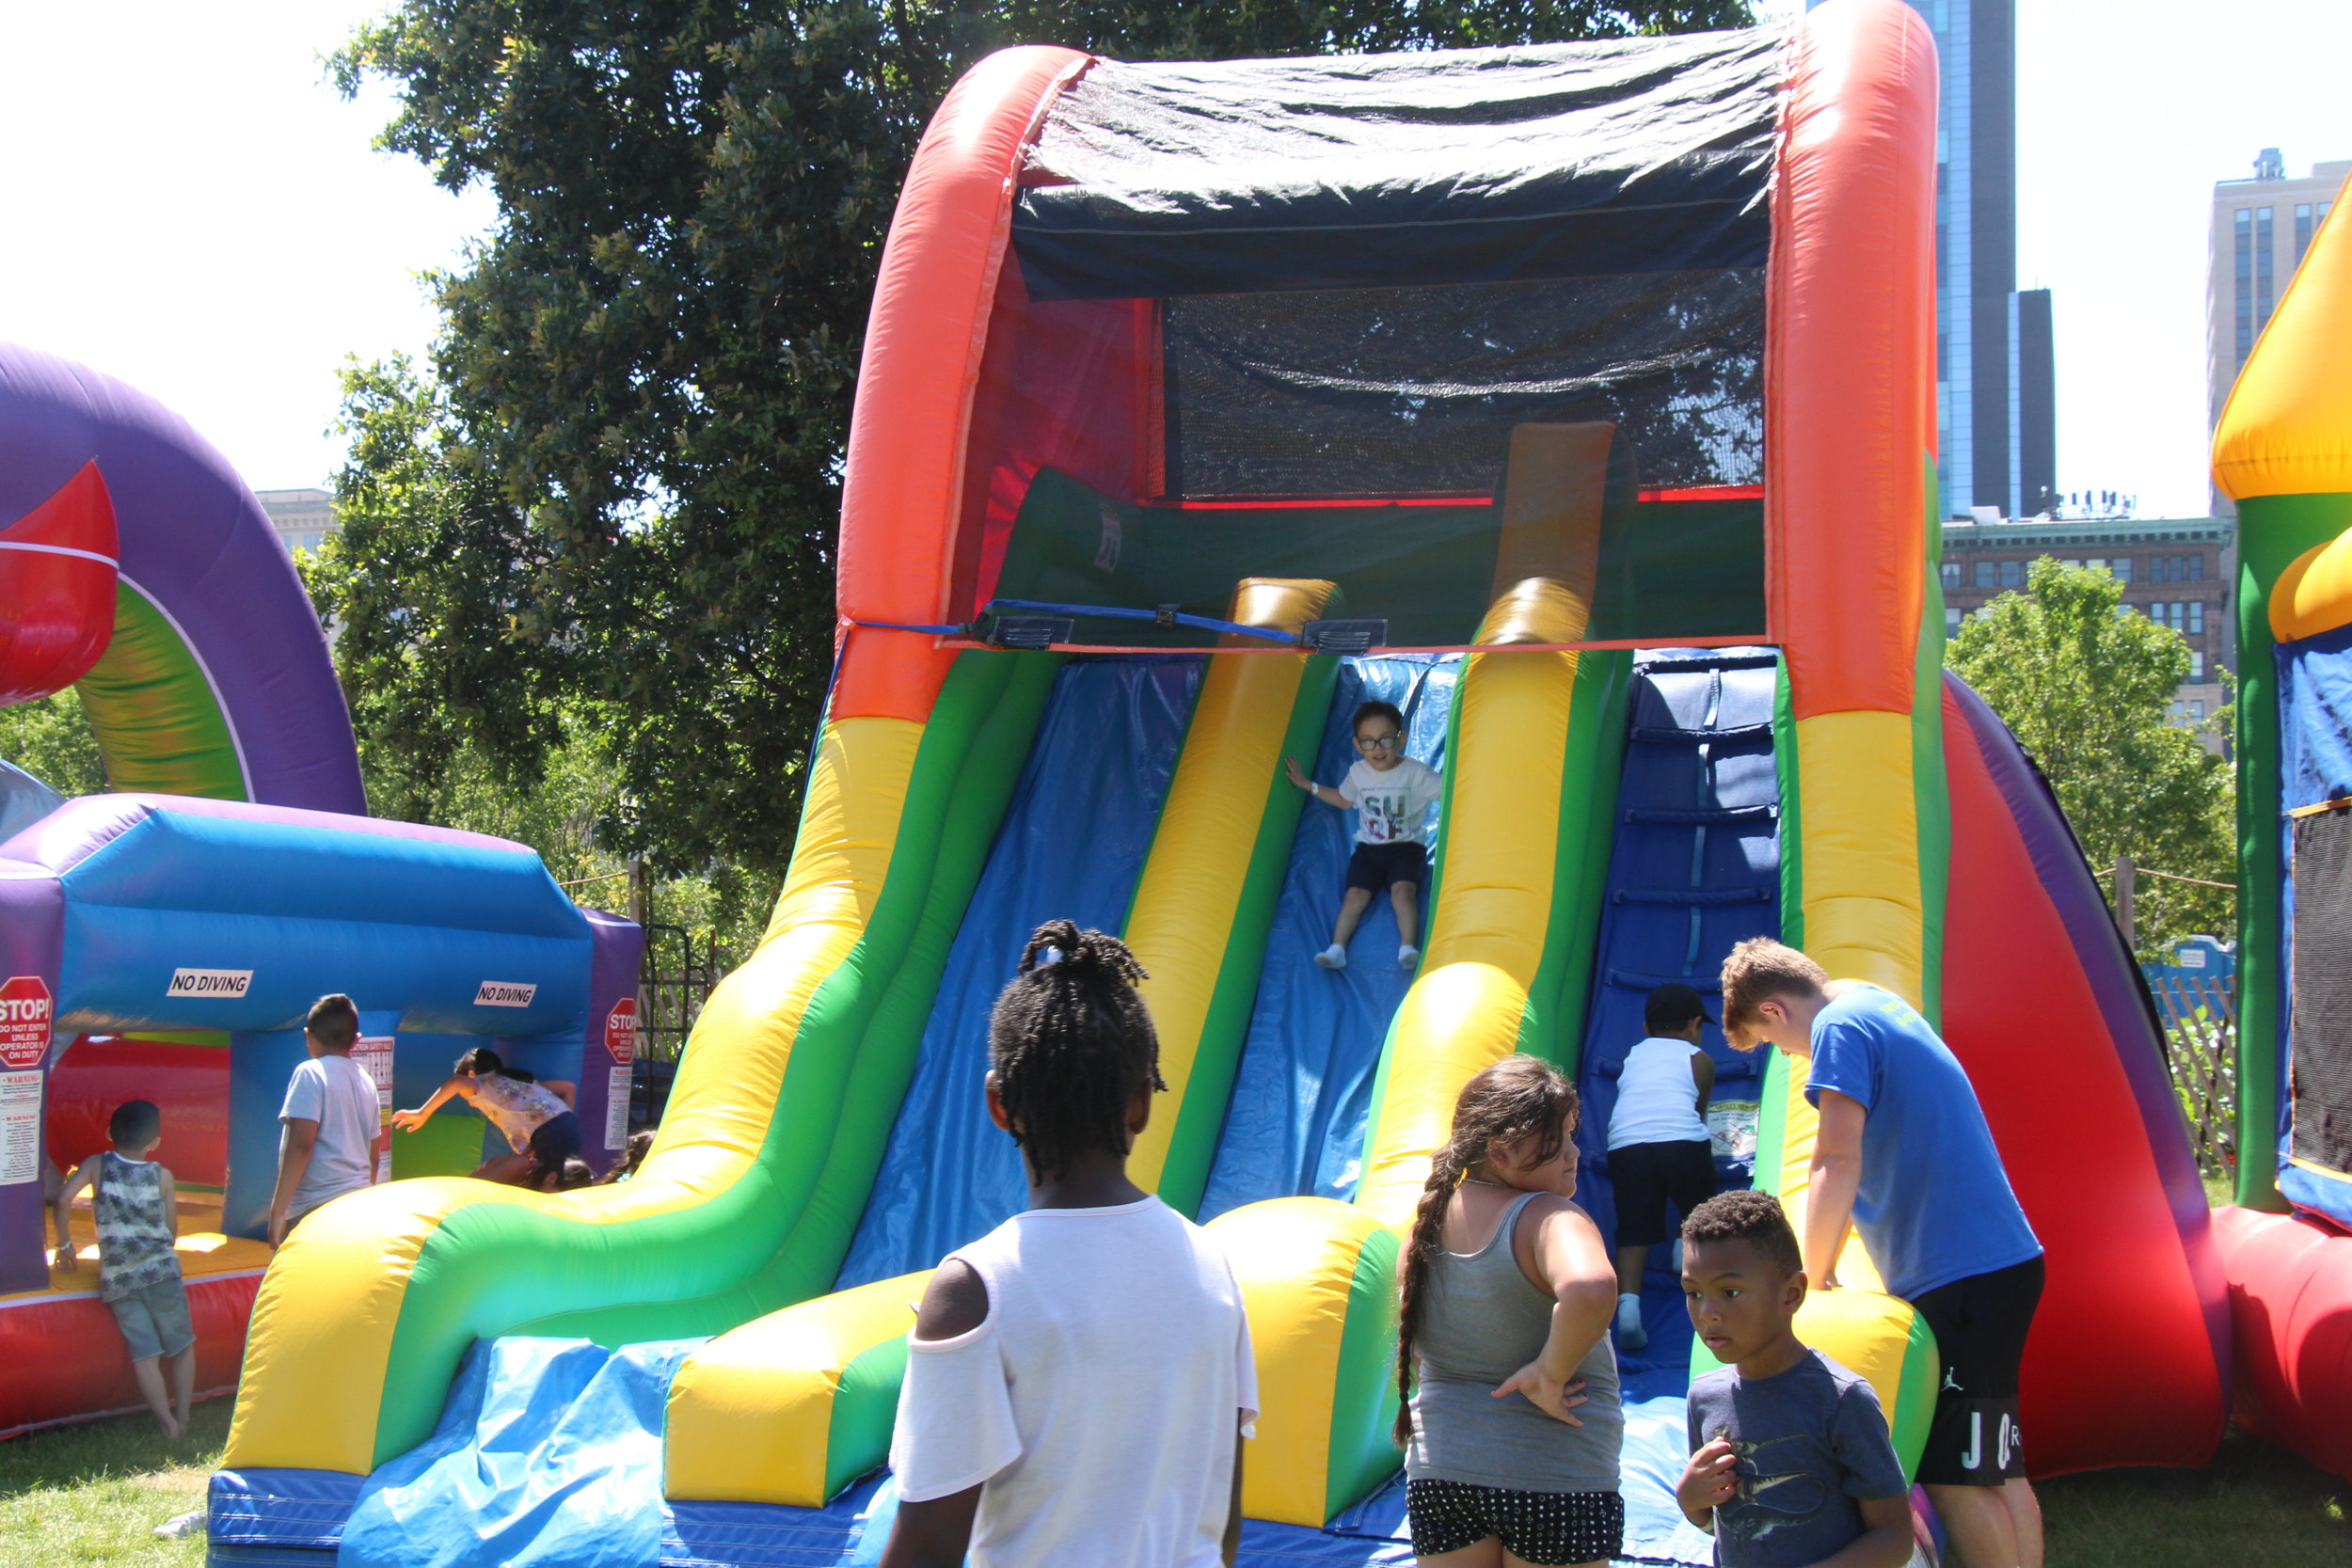  Kids enjoying a fun time on inflatables. Photo by Tyrese Pough  